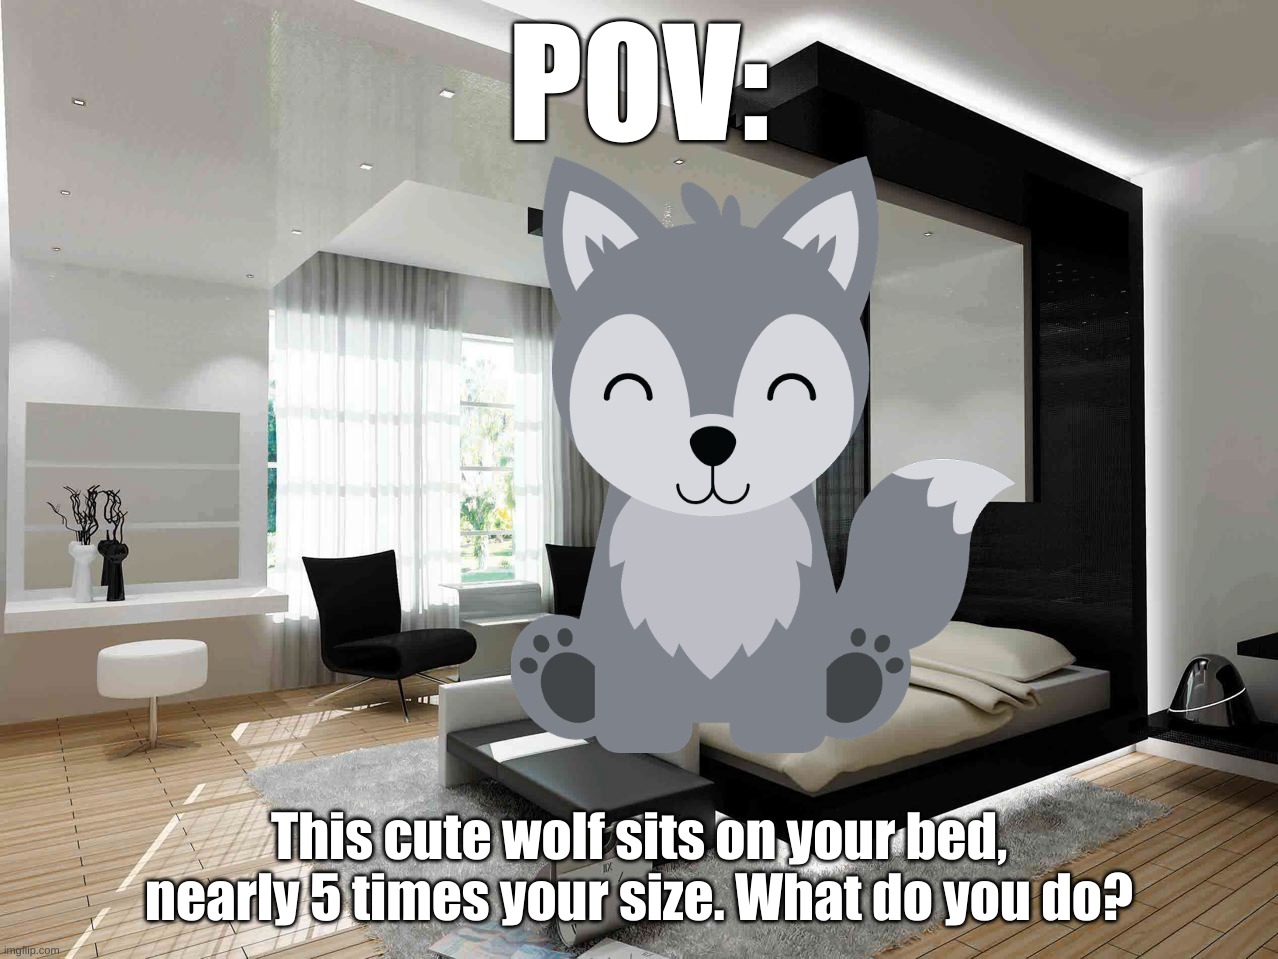 Standard Rules Apply! Yes, it'll be able to talk, and is a Male(may be switched to female if you prefer) | POV:; This cute wolf sits on your bed, nearly 5 times your size. What do you do? | image tagged in no erp,no weapons,you cannot harm or kill it,be wholesome,try not to scare it,keep it e rated | made w/ Imgflip meme maker